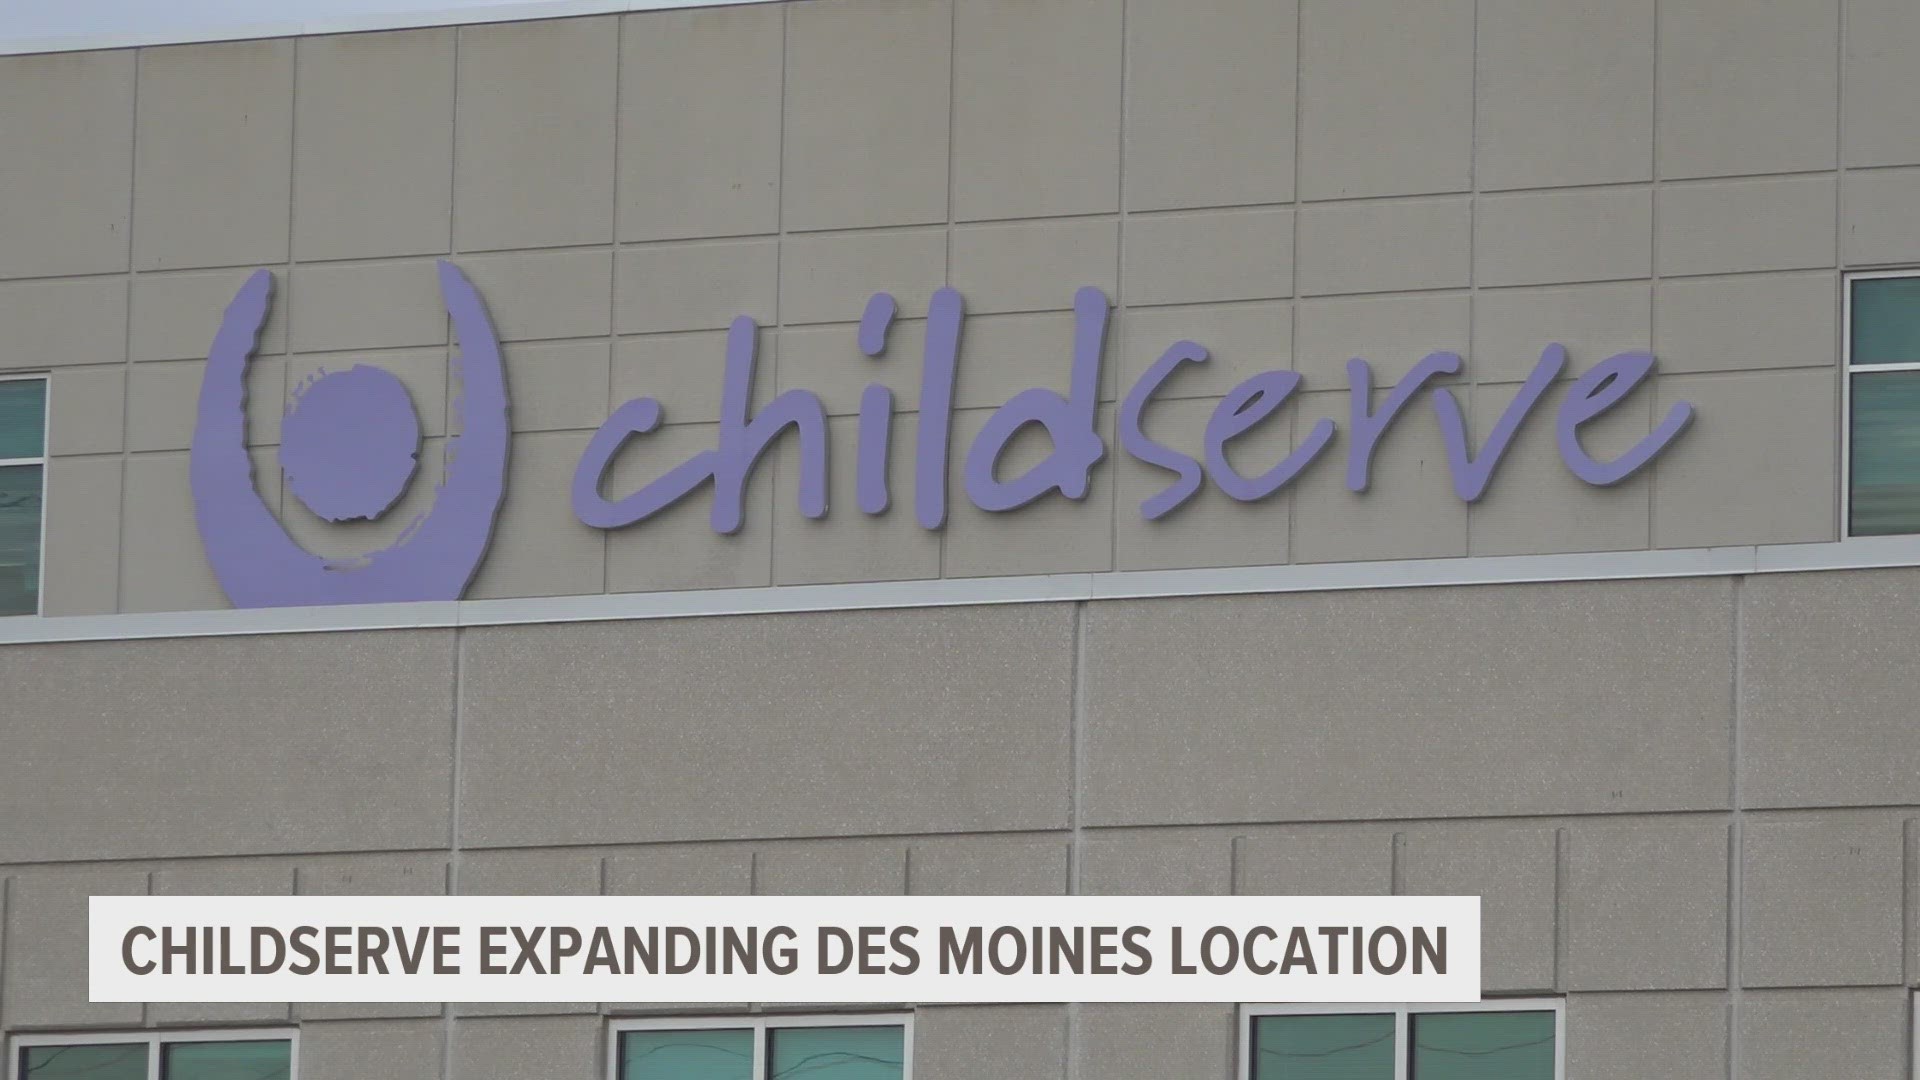 The new facility will be twice as large as their current Des Moines location.